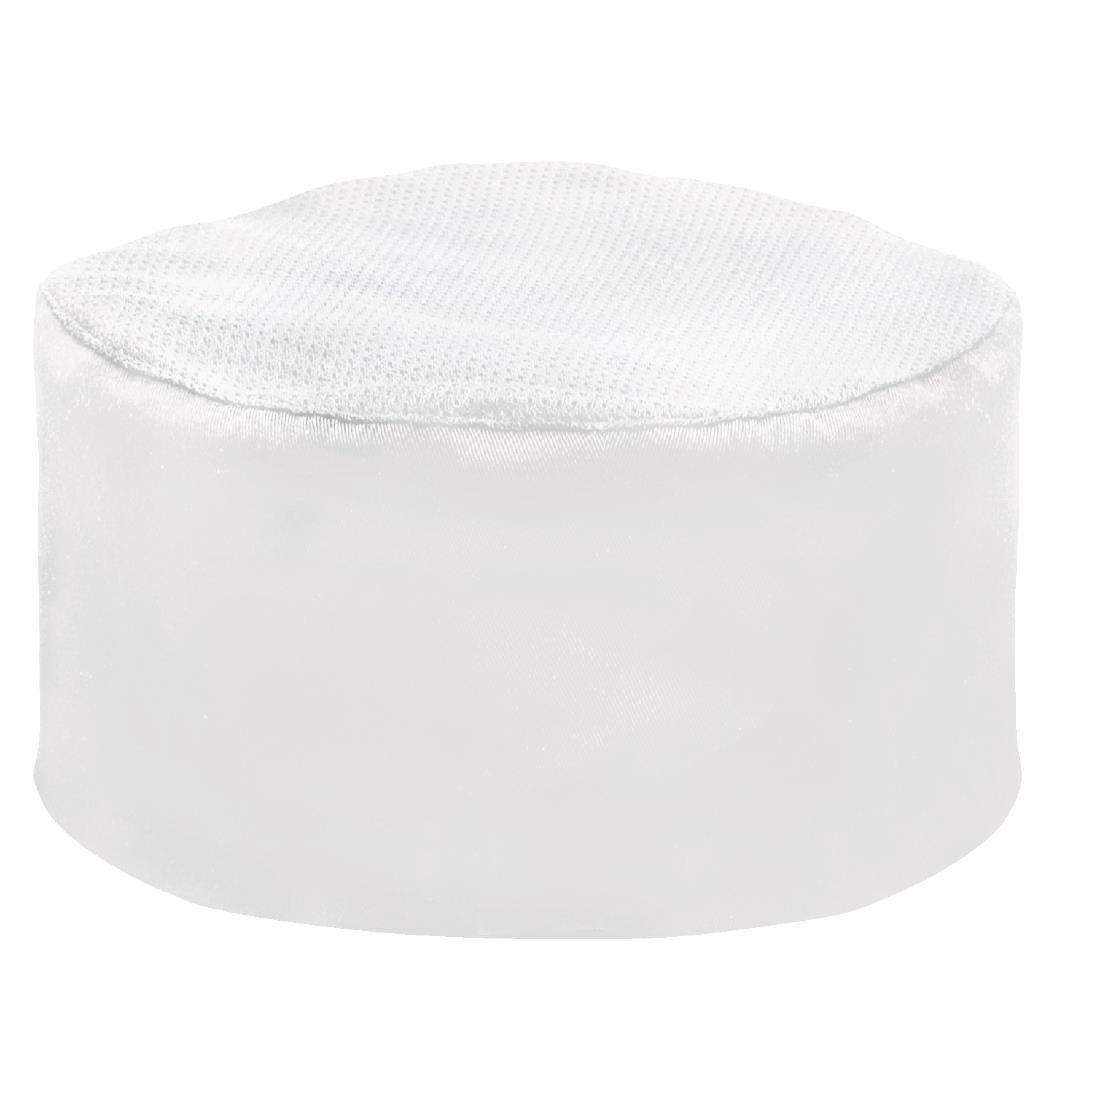 Chef Works Cool Vent Beanie White - A703  - 3